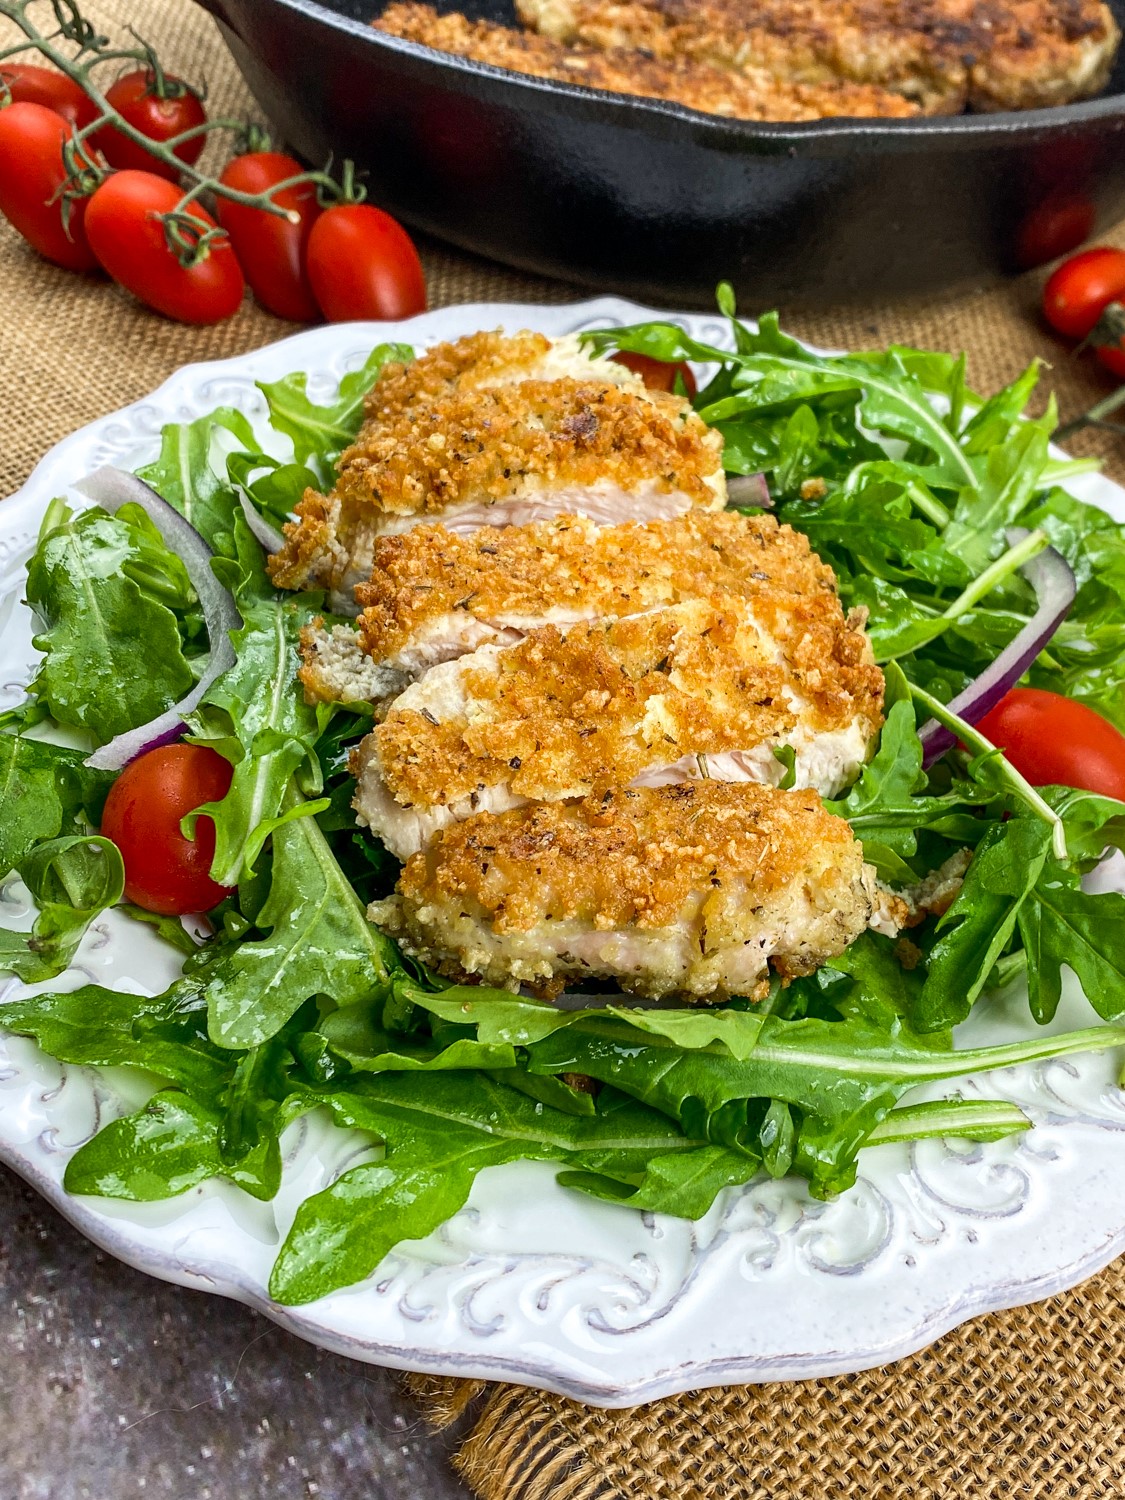 Get the recipe for this gluten free breaded chicken cutlets that's easy to prepare, tastes delicious and can be made low carb.